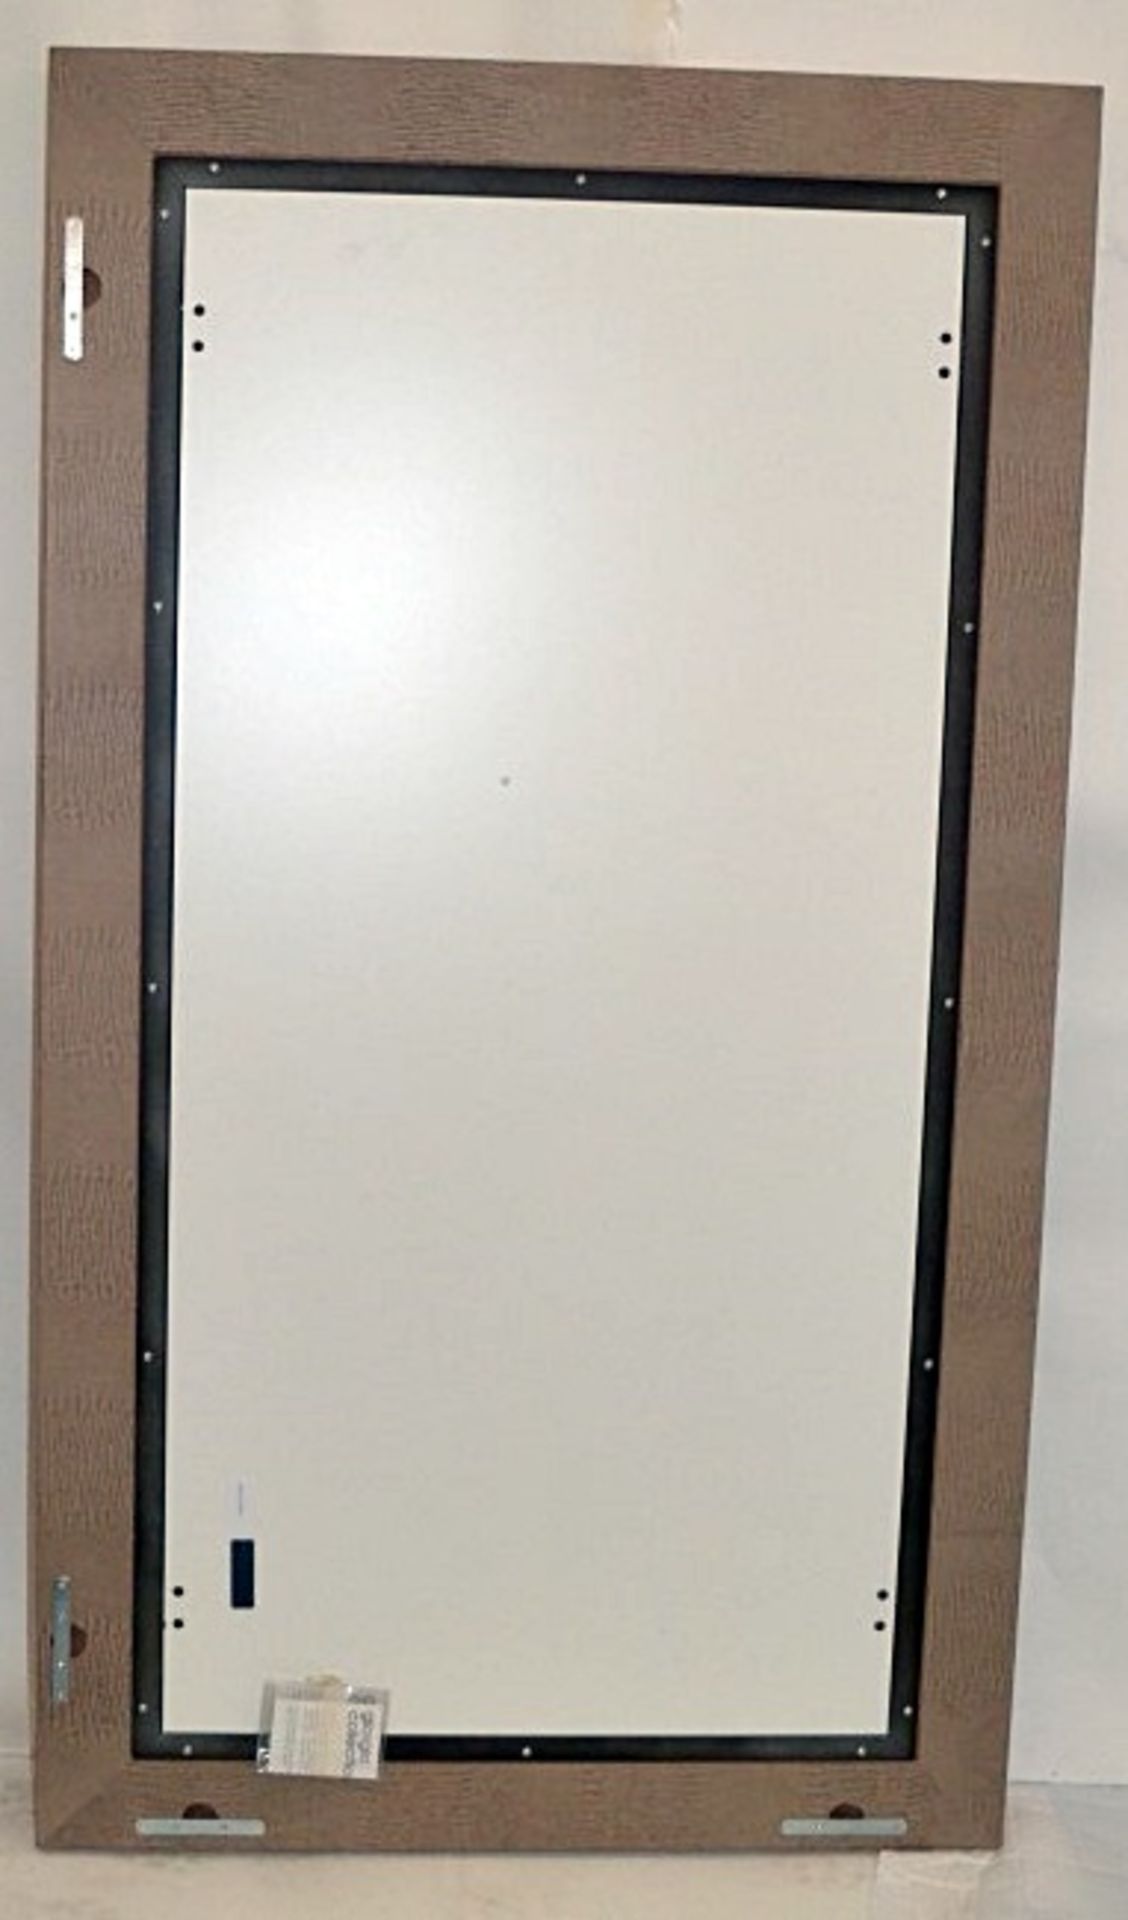 1 x GIORGIO Mirror Framed In Leather (Art. 9961) - W160 x H90cm - Ref: 5244208 P4 - CL087 - - Image 5 of 7